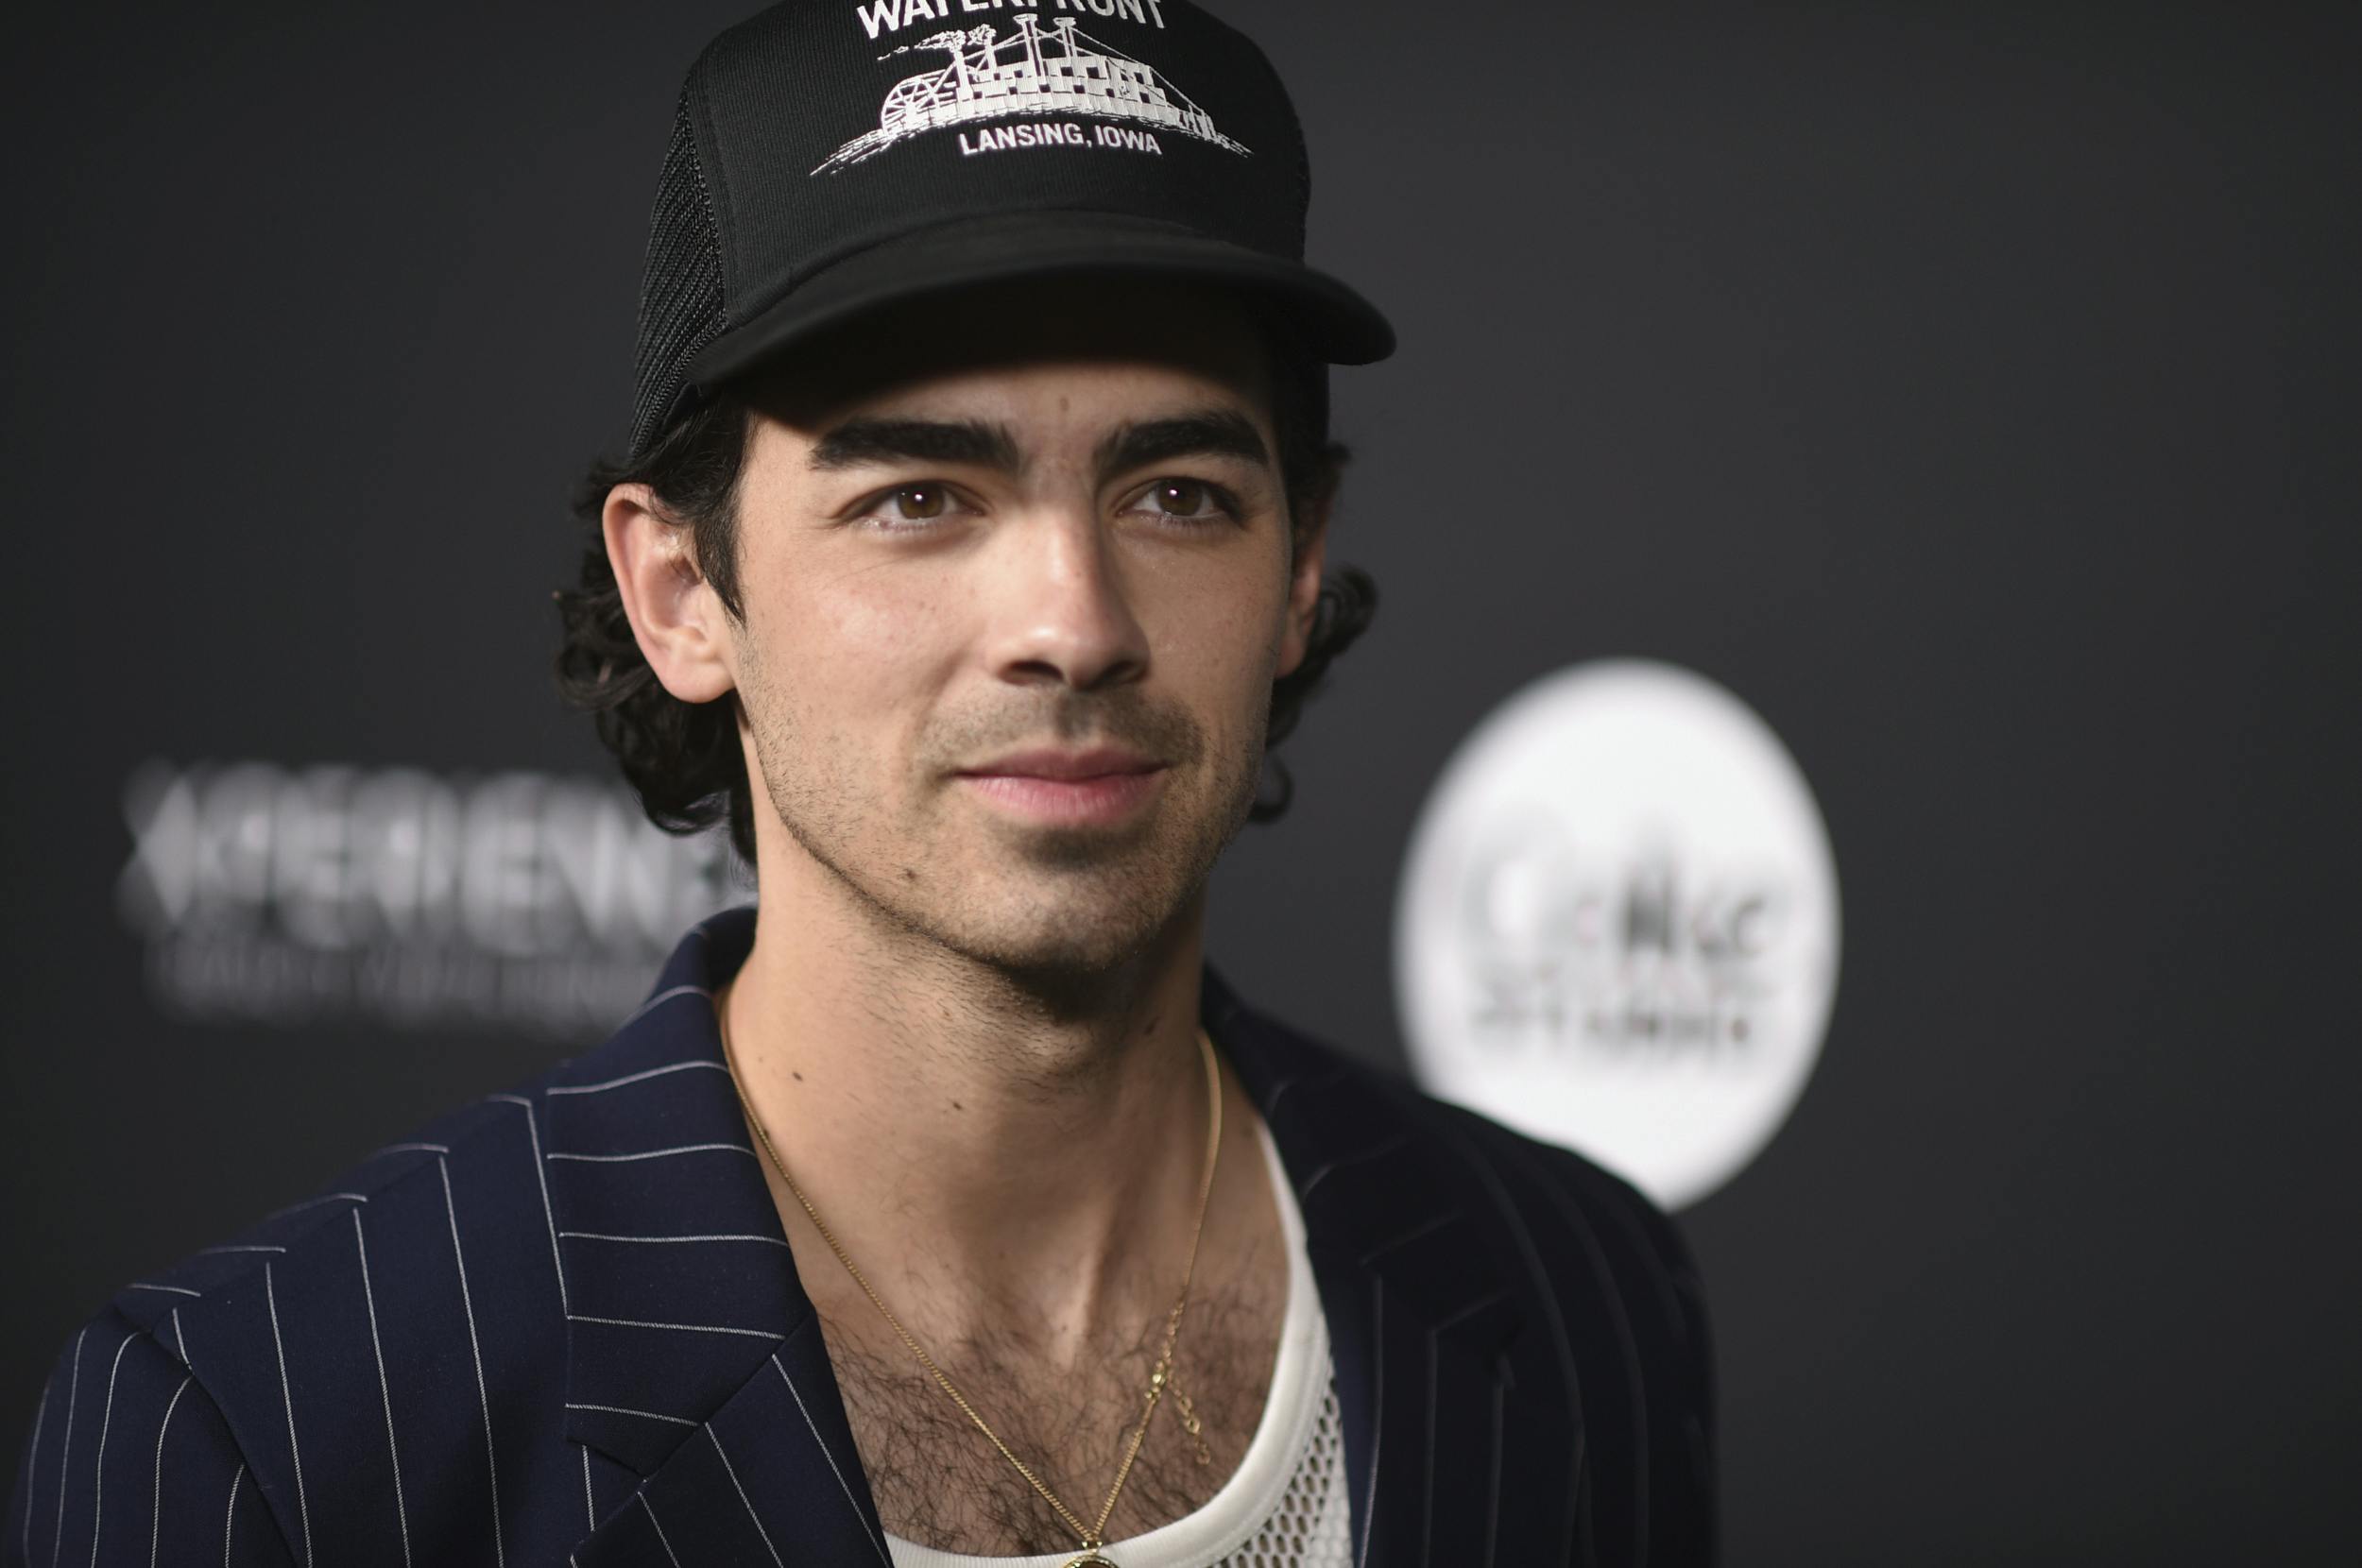 Joe Jonas arrives at the Universal Music Group Grammy After Party on Sunday, Feb. 5, 2023, at Milk Studios in Los Angeles. (Photo by Richard Shotwell/Invision/AP)